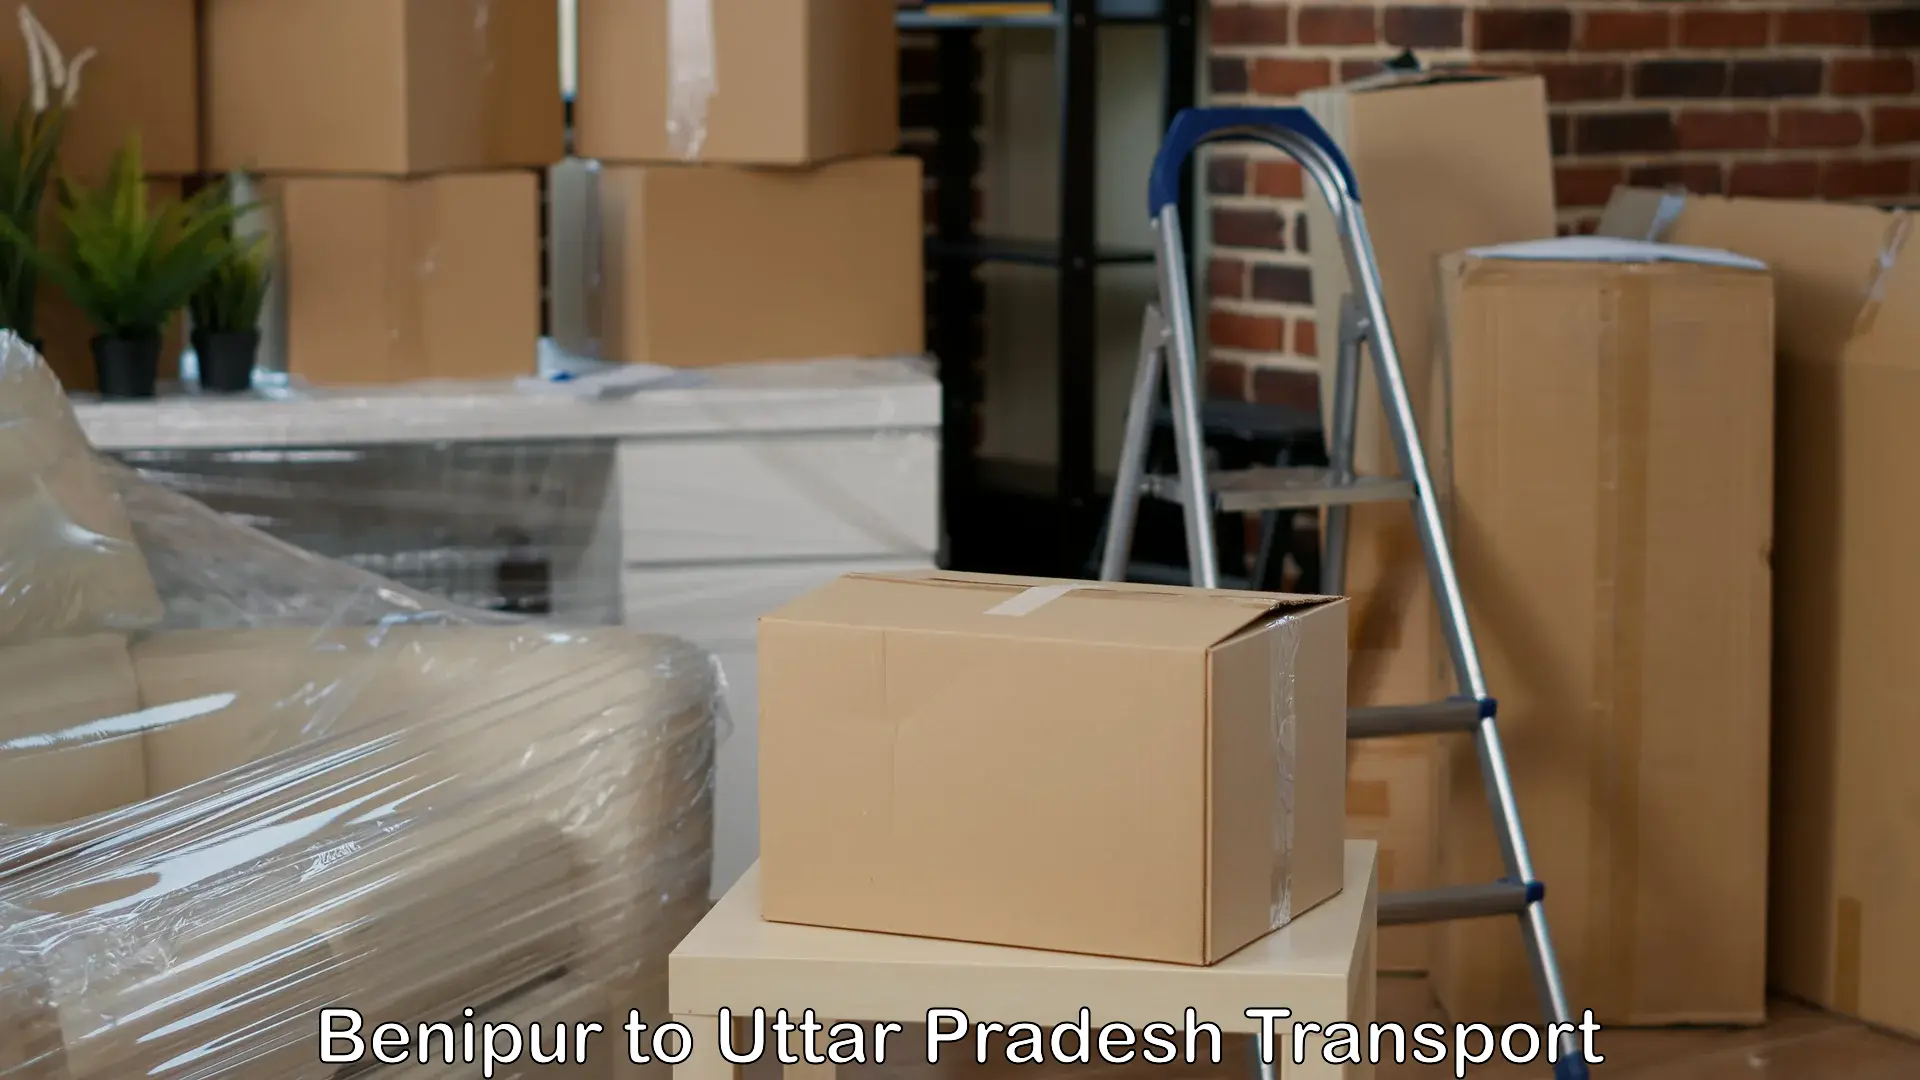 Truck transport companies in India Benipur to Chitrakoot